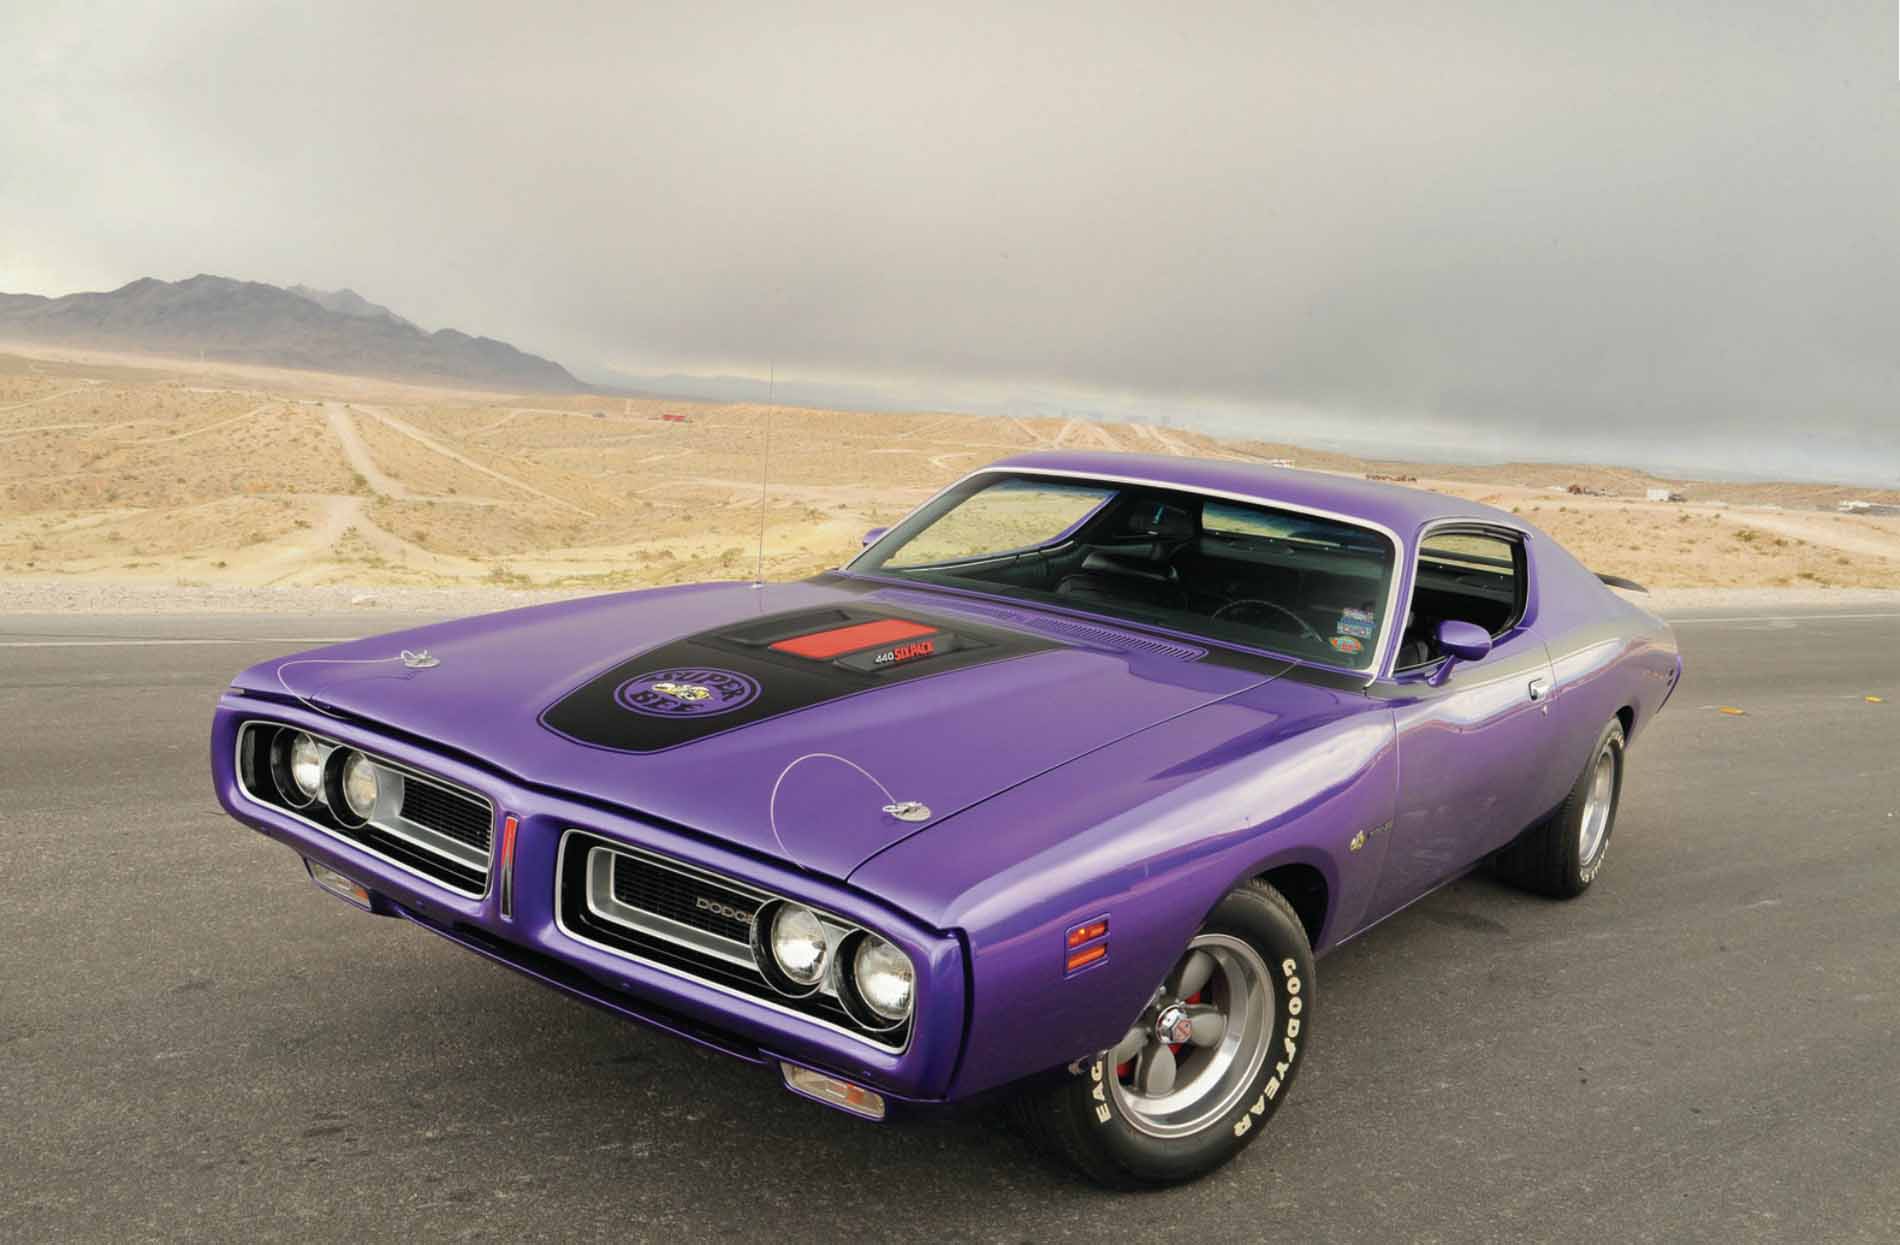 Lavender Car On Desert Road Photoshoot Hd Wallpapers - Dodge Charger Super Bee 71 - HD Wallpaper 